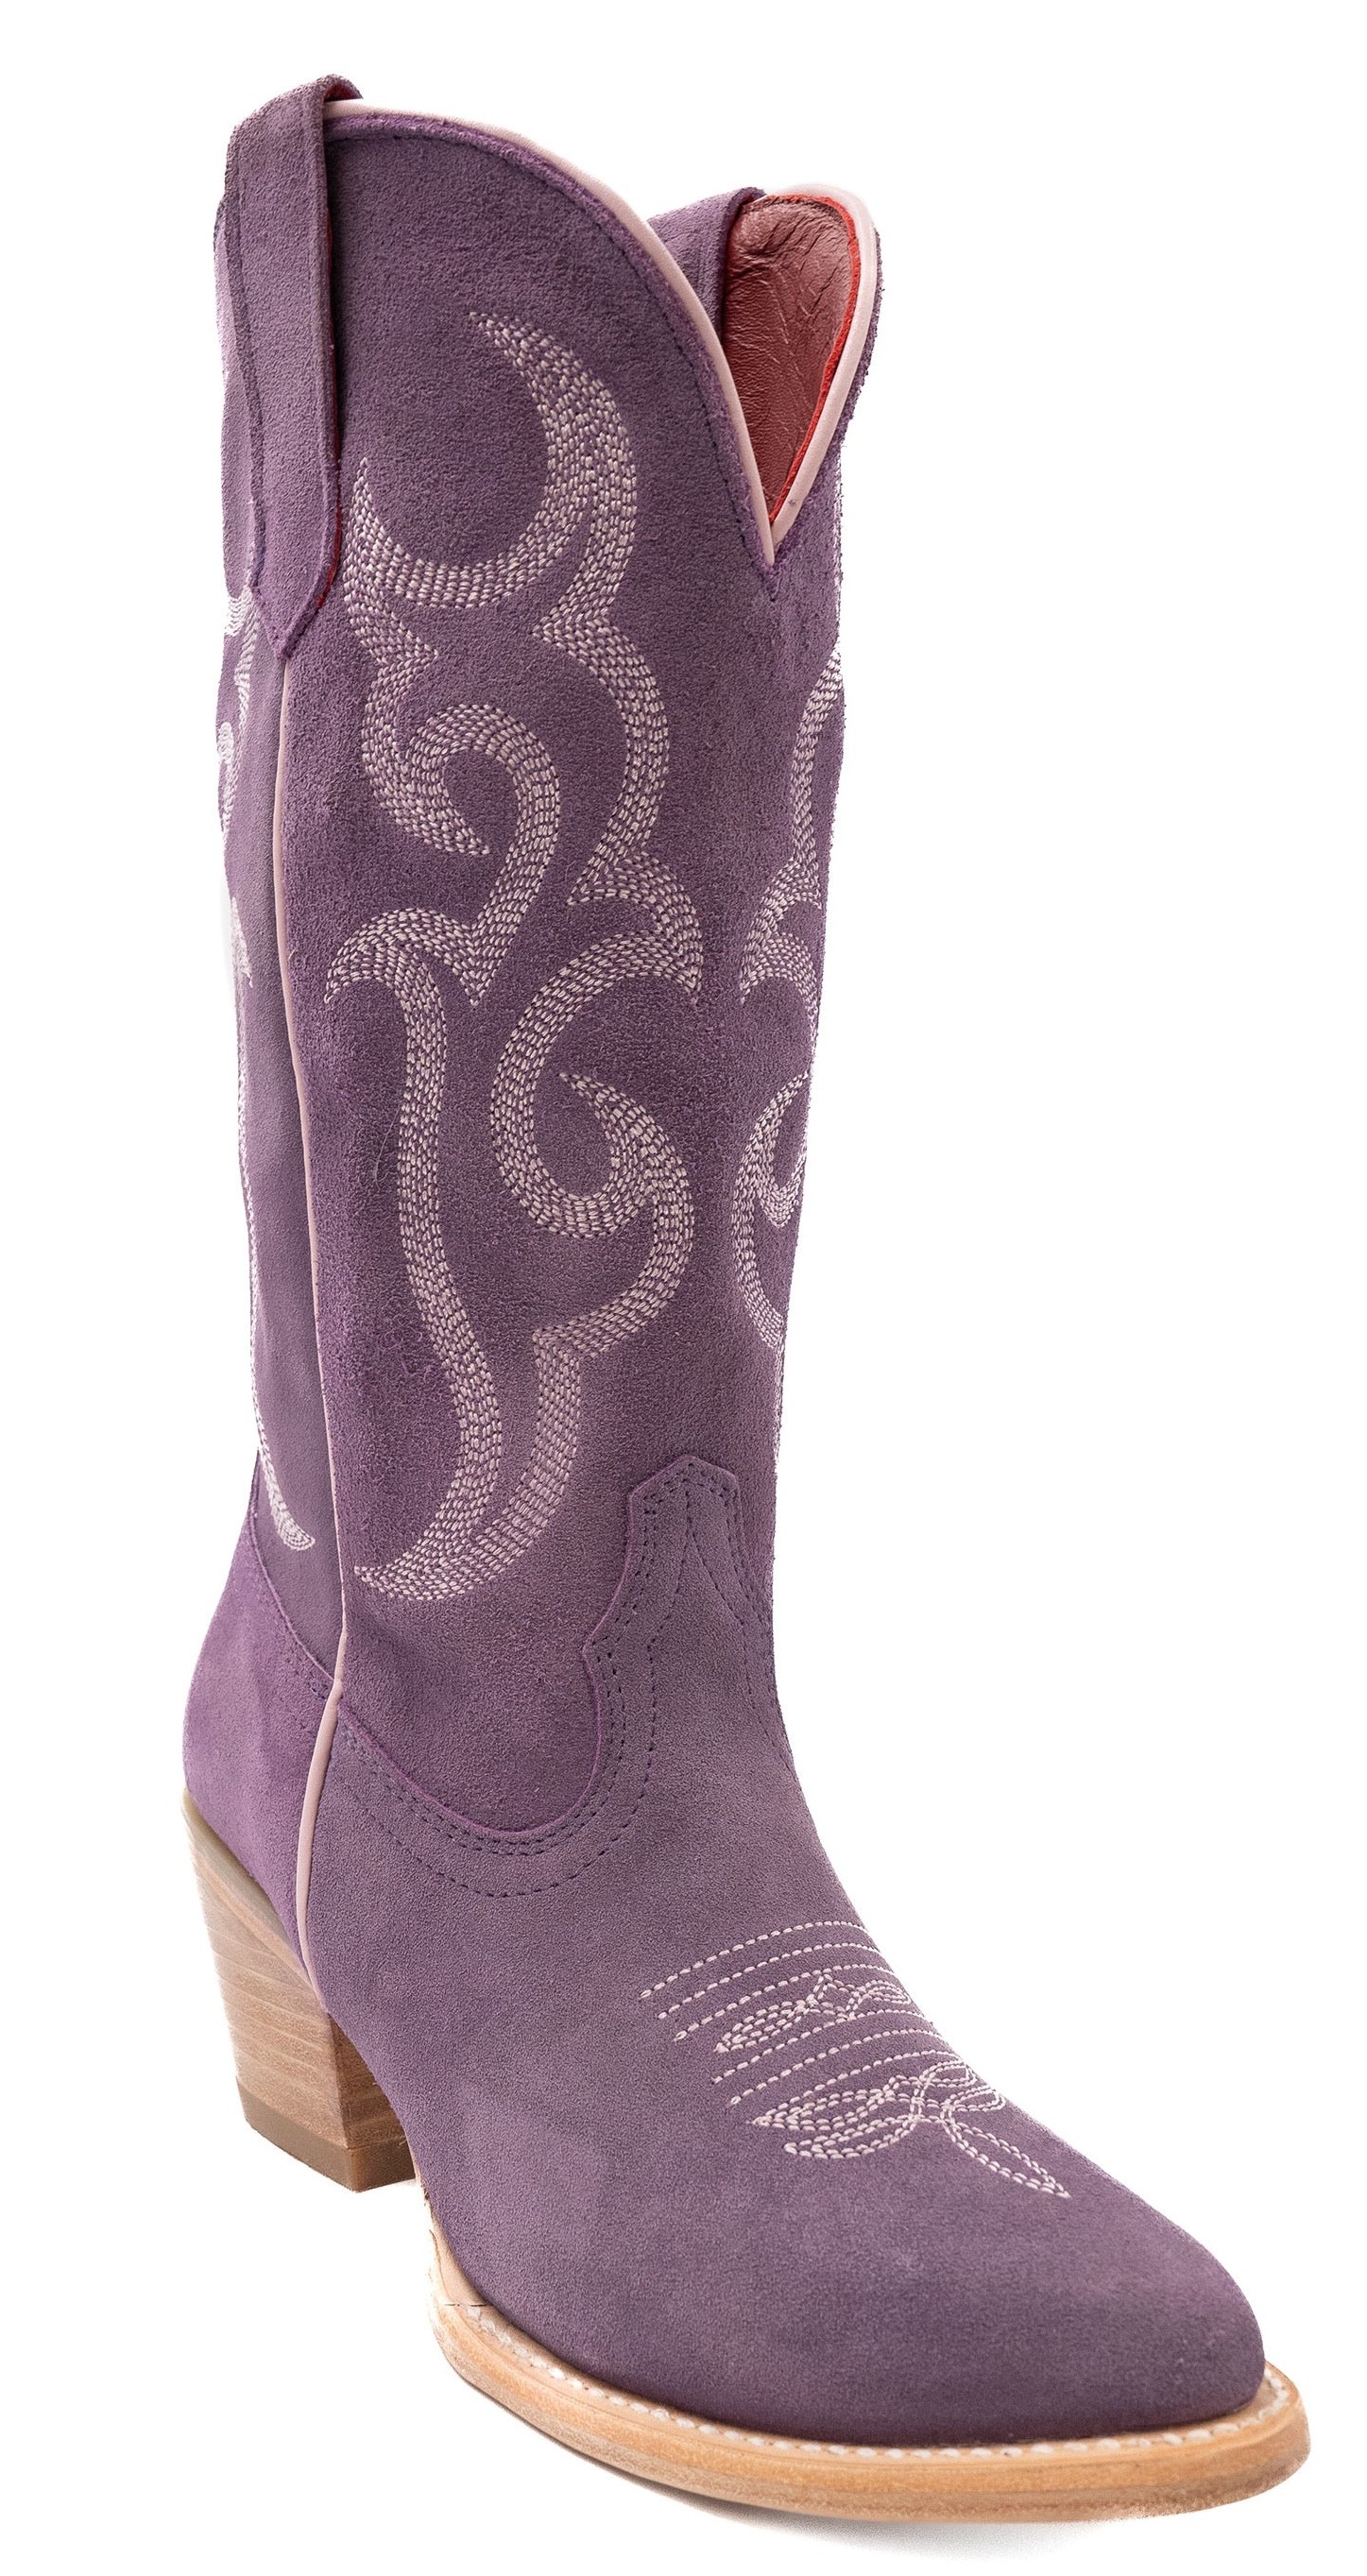 Ferrini Ladies "Quinn" Lilac Full Grain Leather Snipped Toe Cowgirl Shoes 84861-44